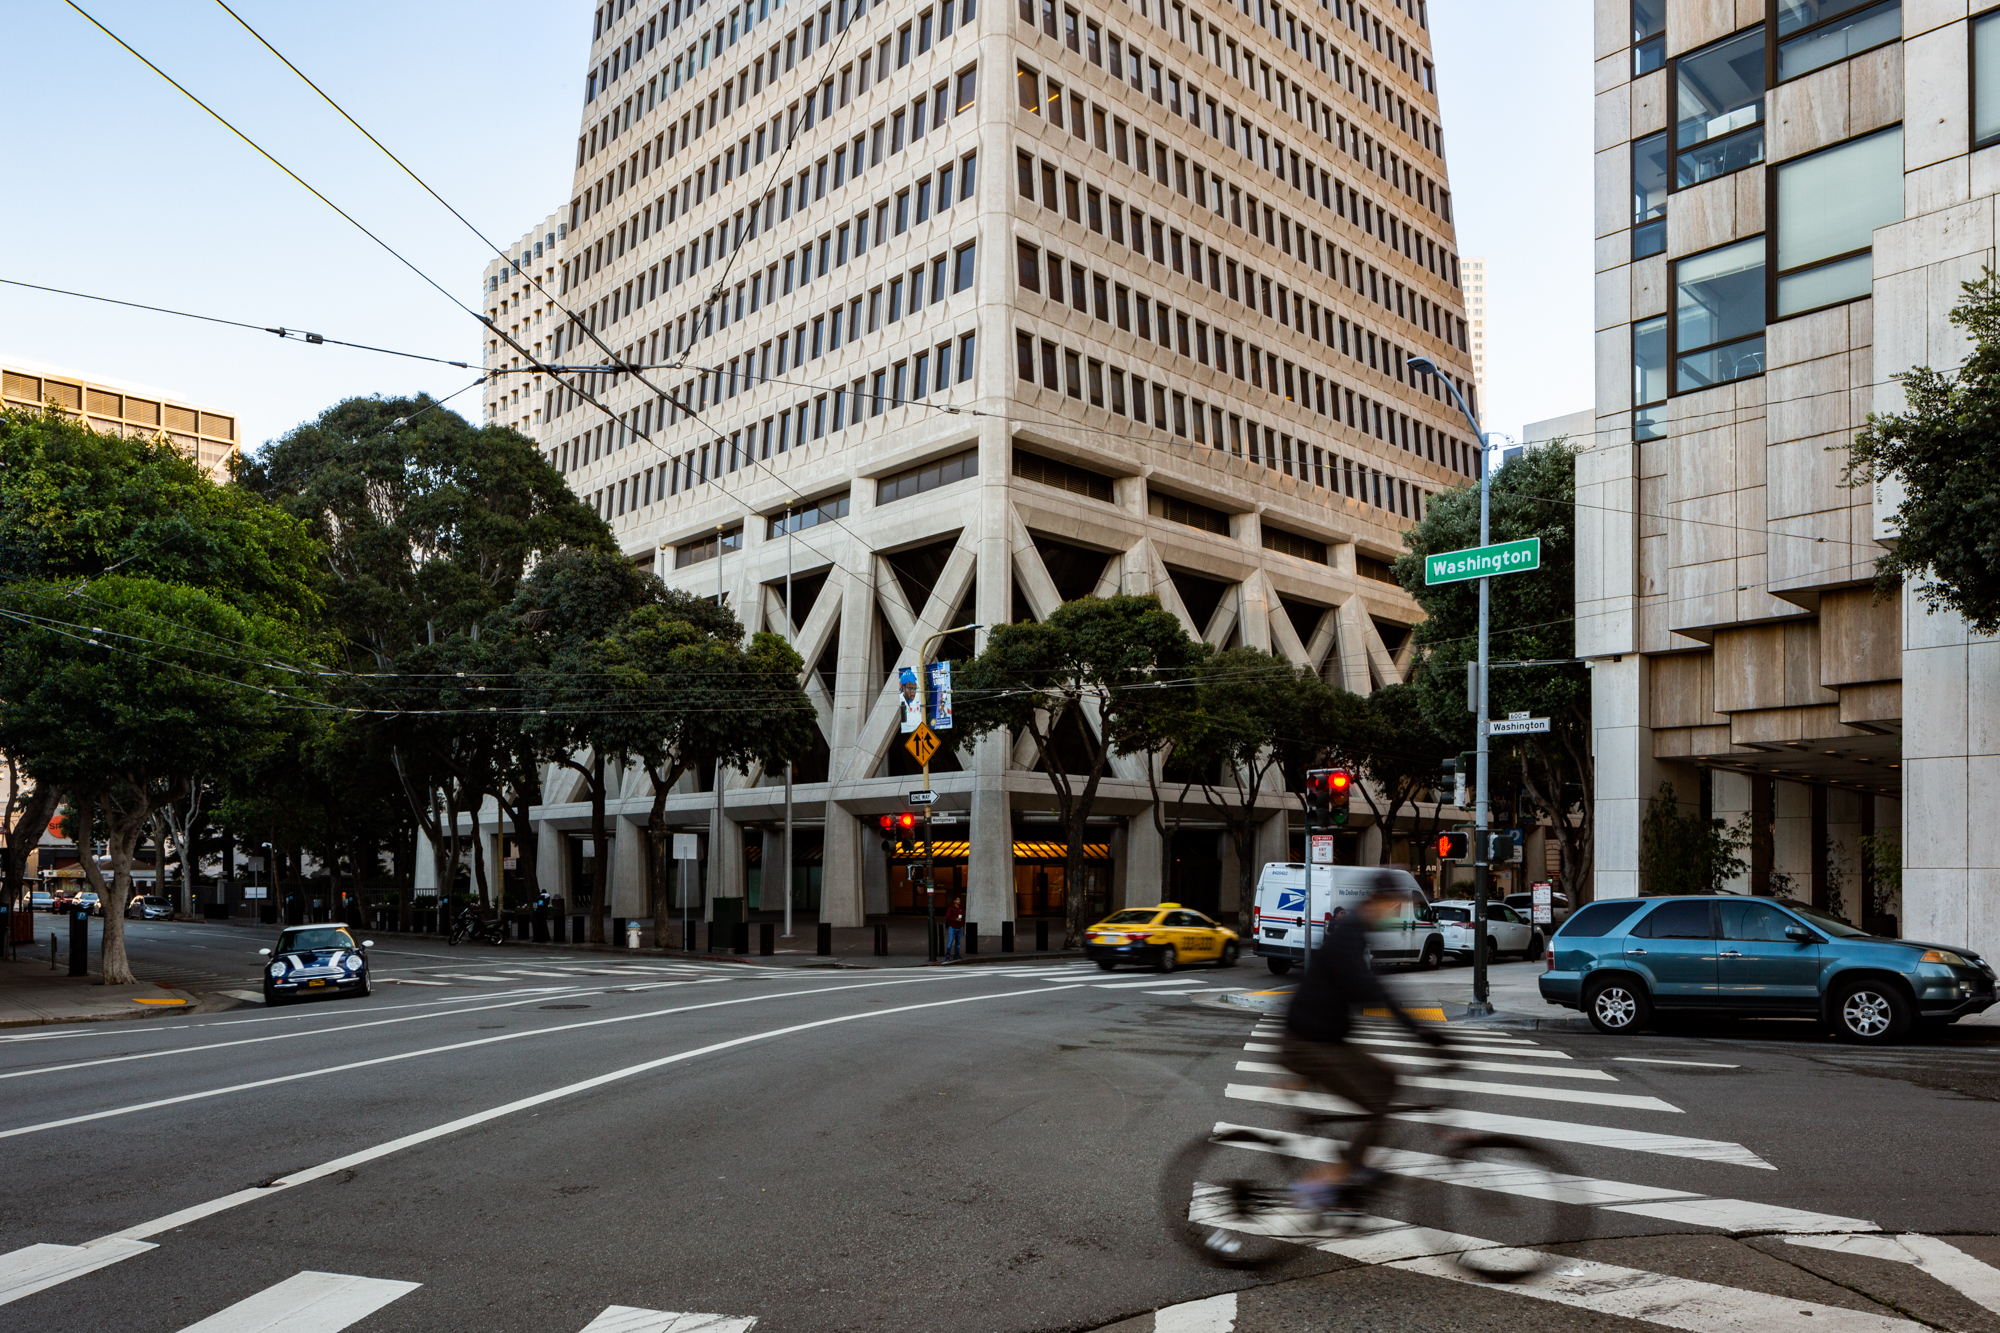 Transamerica Pyramid, from Columbus Avenue and Washington, image by Andrew Campbell Nelson